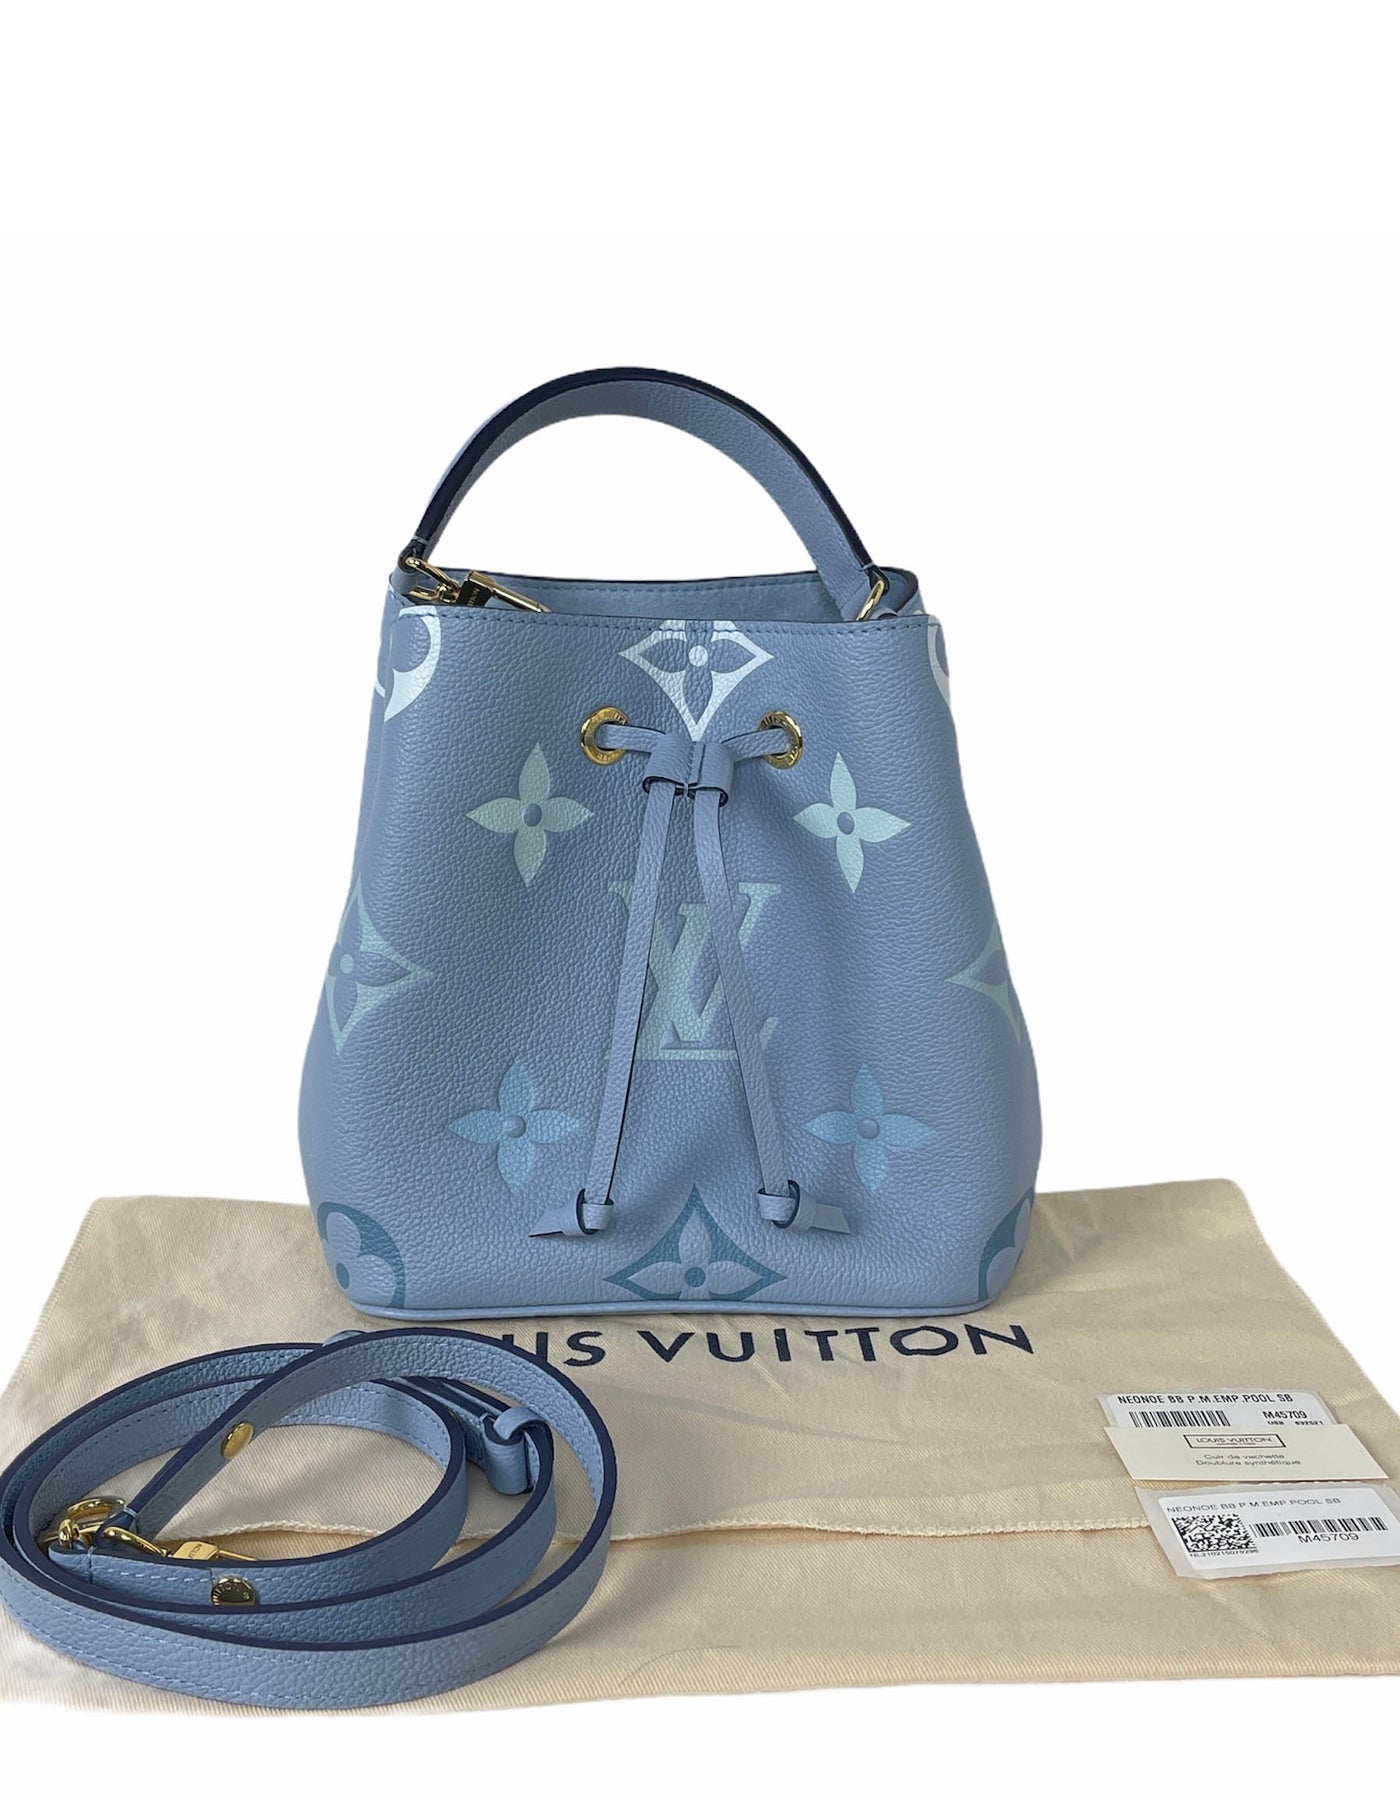 Louis vuitton neo noe bb by the pool blue for Sale in Atlanta, GA